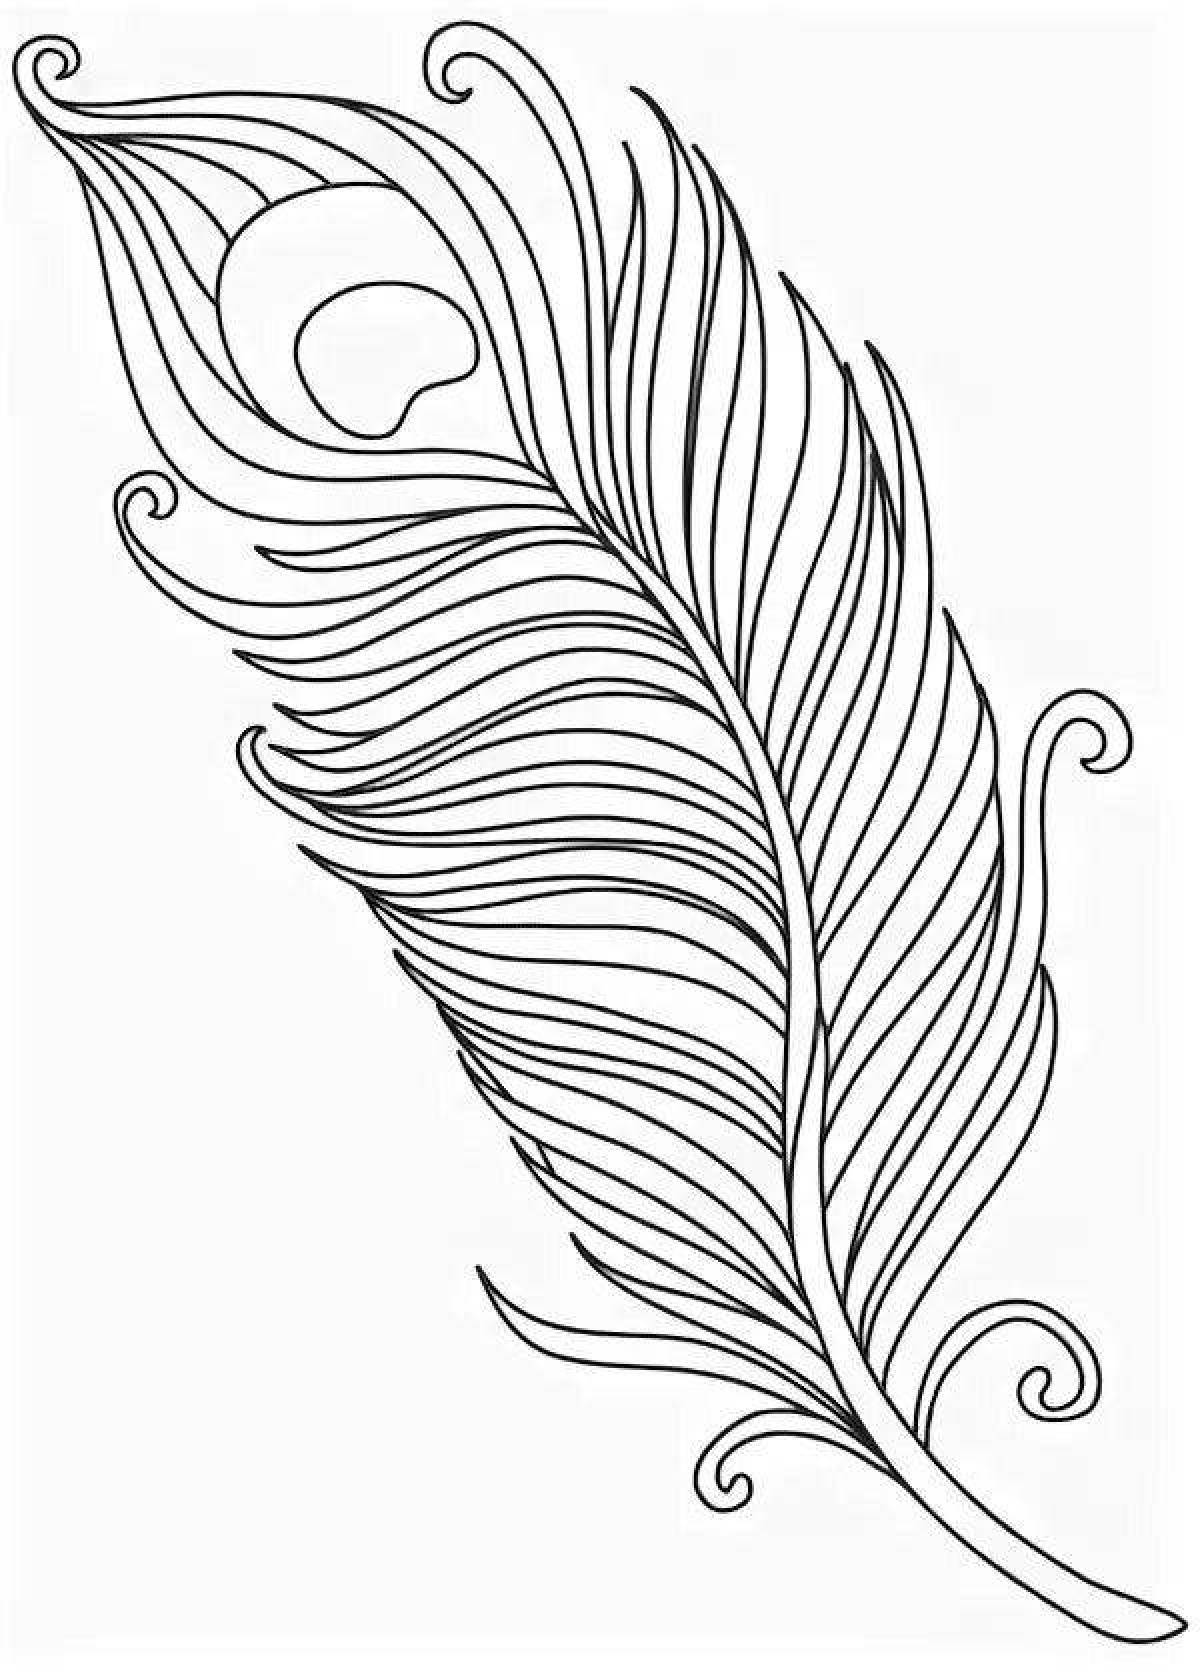 Coloring art peacock feather